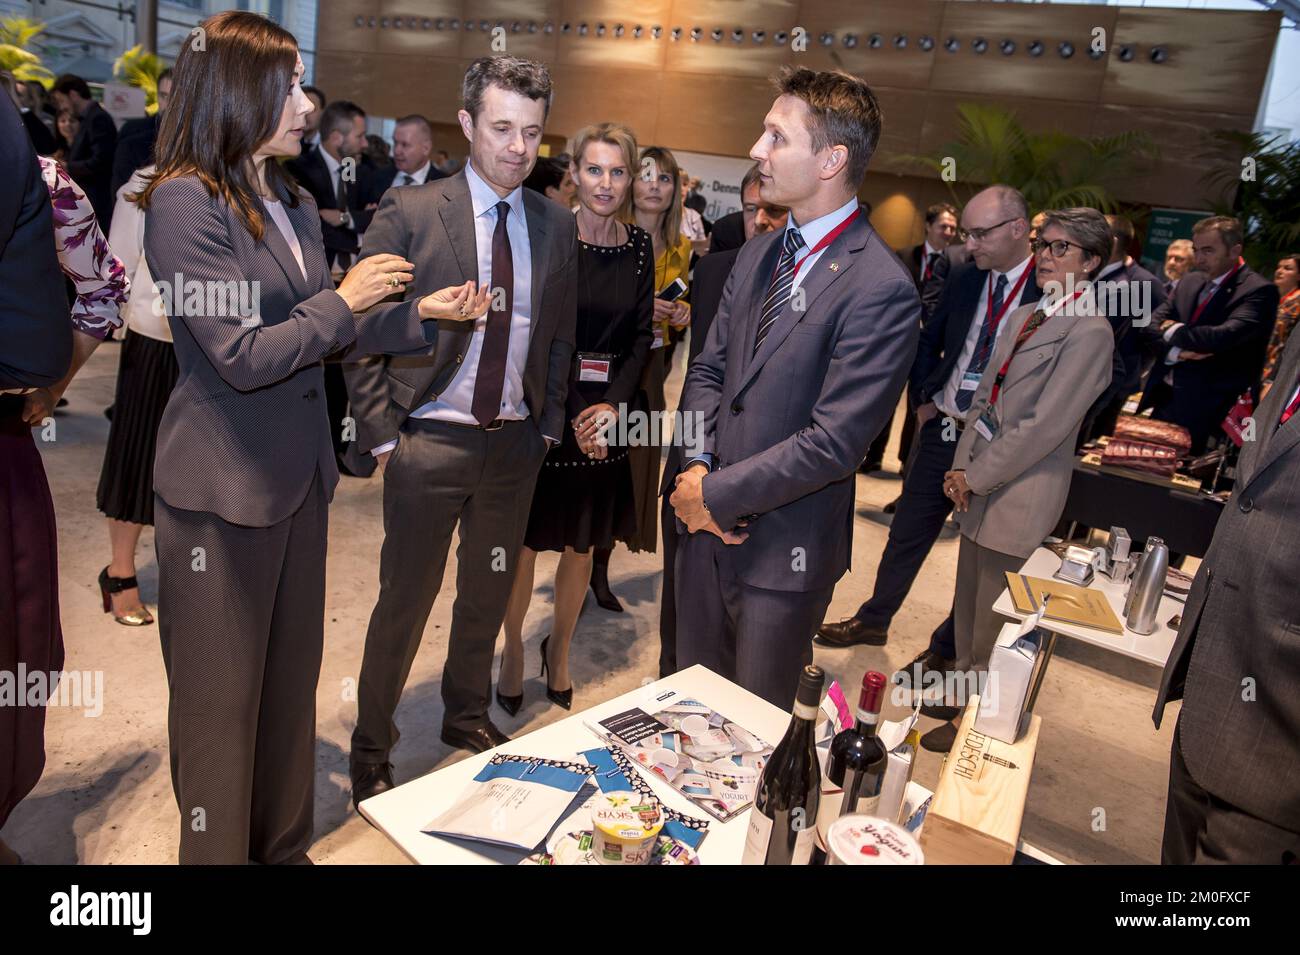 On November 7th 2018 TRH Crown Prince Frederik and Crown Princess Mary attended a Nordic and Italian gastro event in Rome. The Crown Prince Couple are part of a business delegation tour lasting from November 6th to 8th. Stock Photo